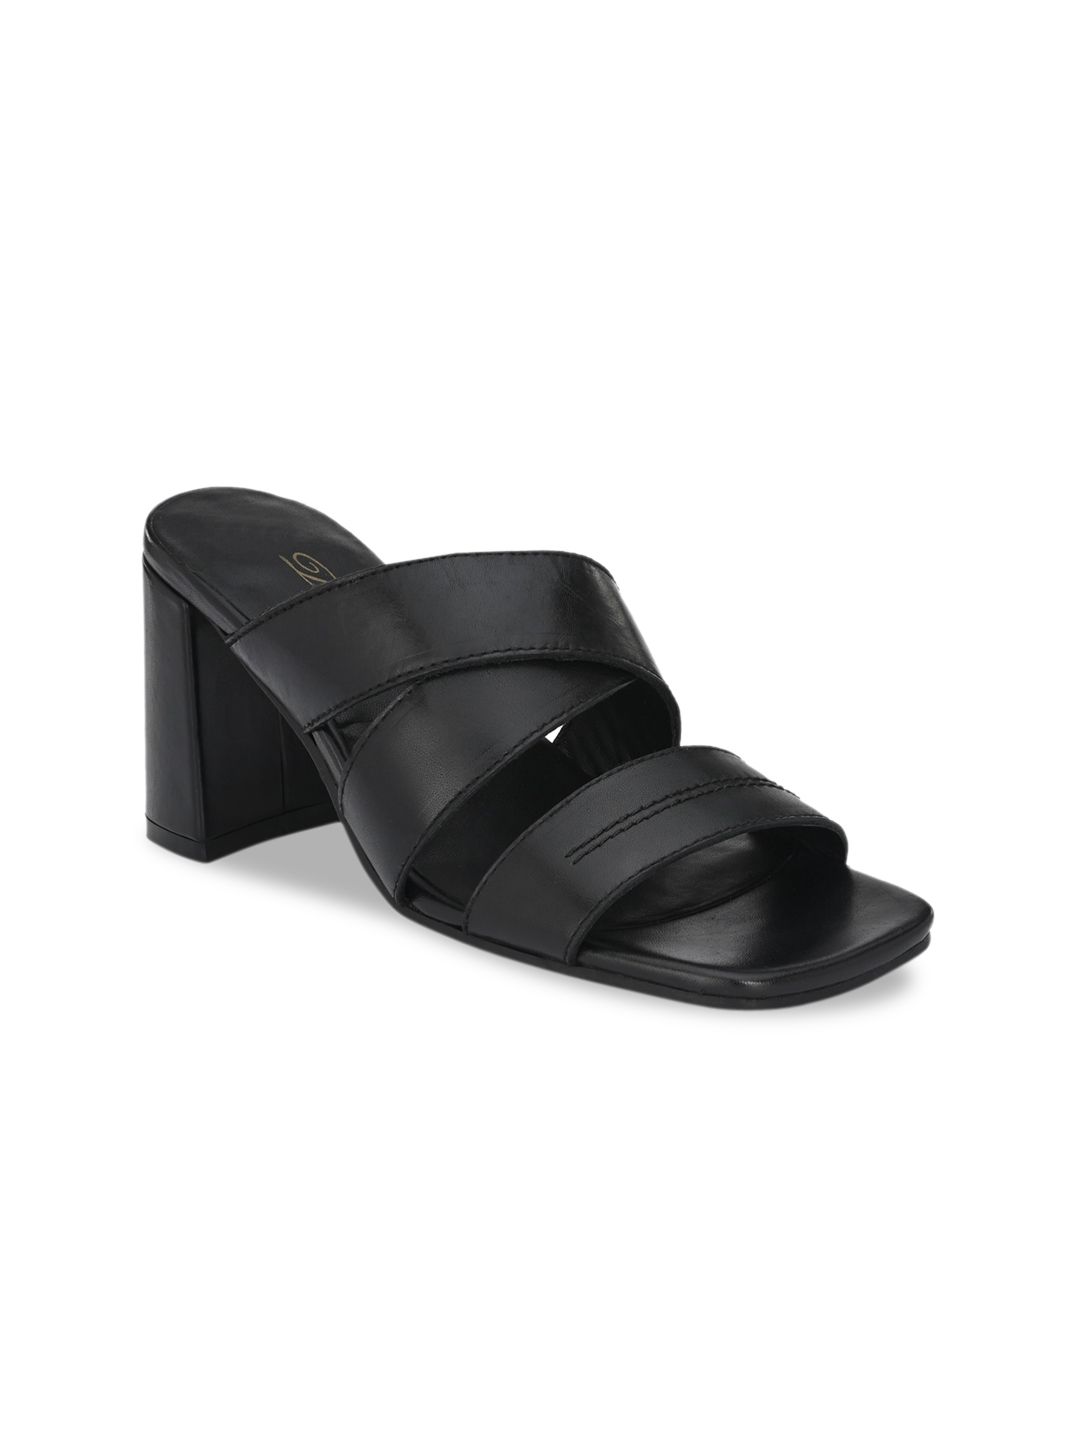 Delize Women Black Solid Sandals Price in India